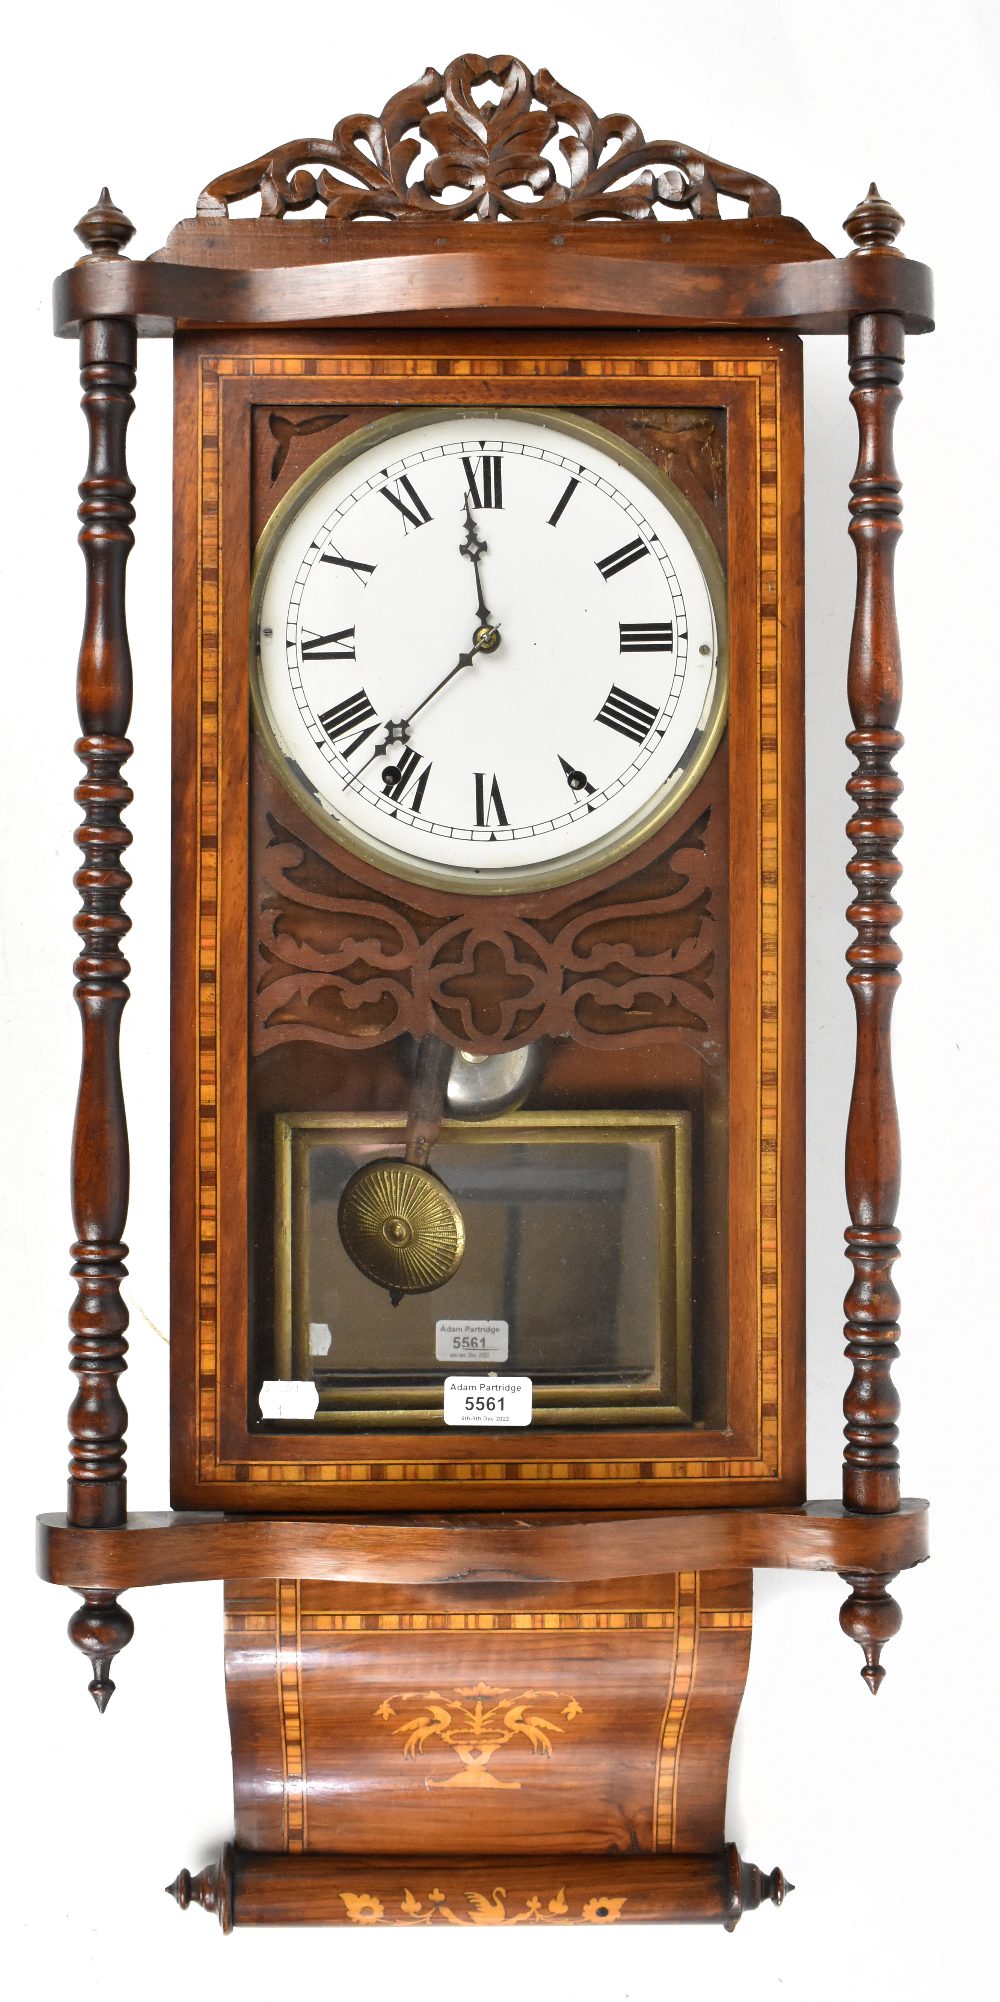 A 19th century American inlaid walnut wall clock with carved pediment above the circular dial set